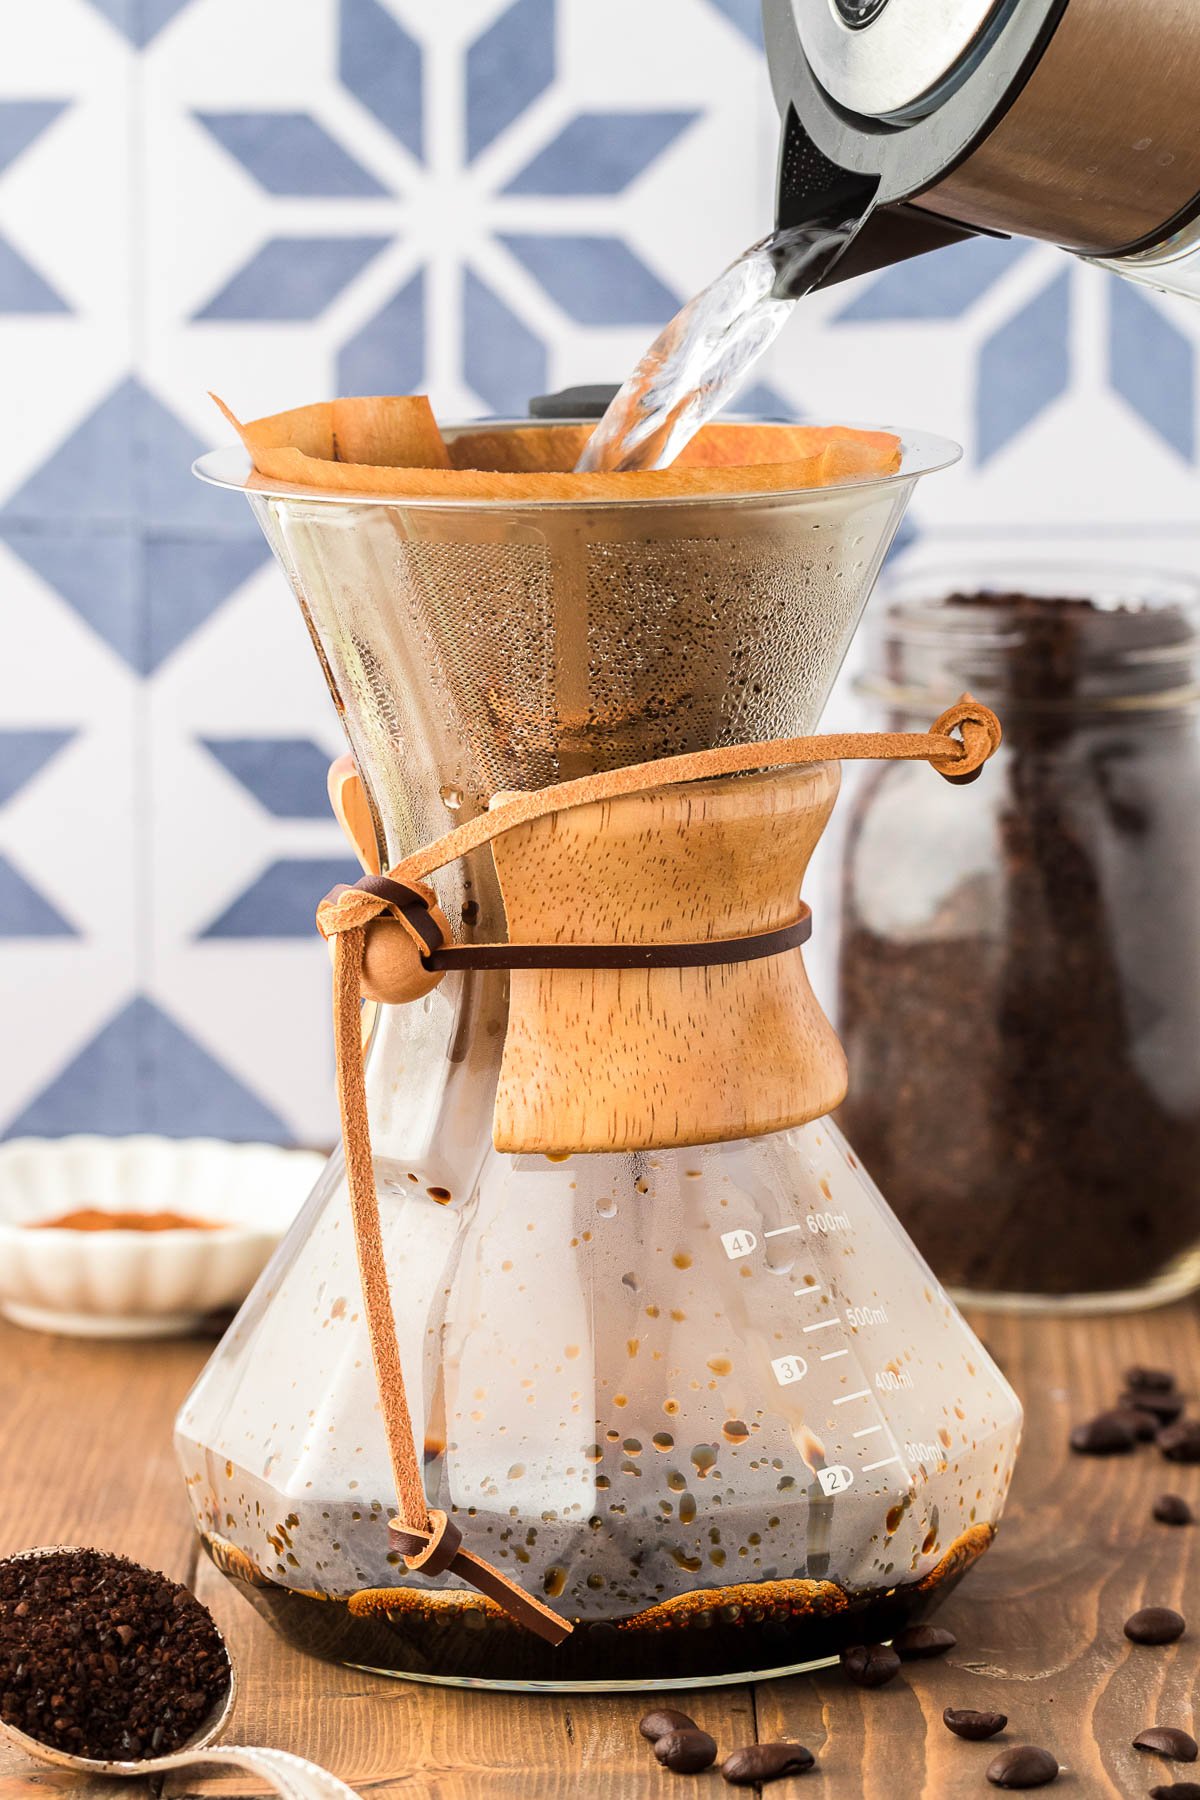 Coffee being brewed in a pour over carafe.